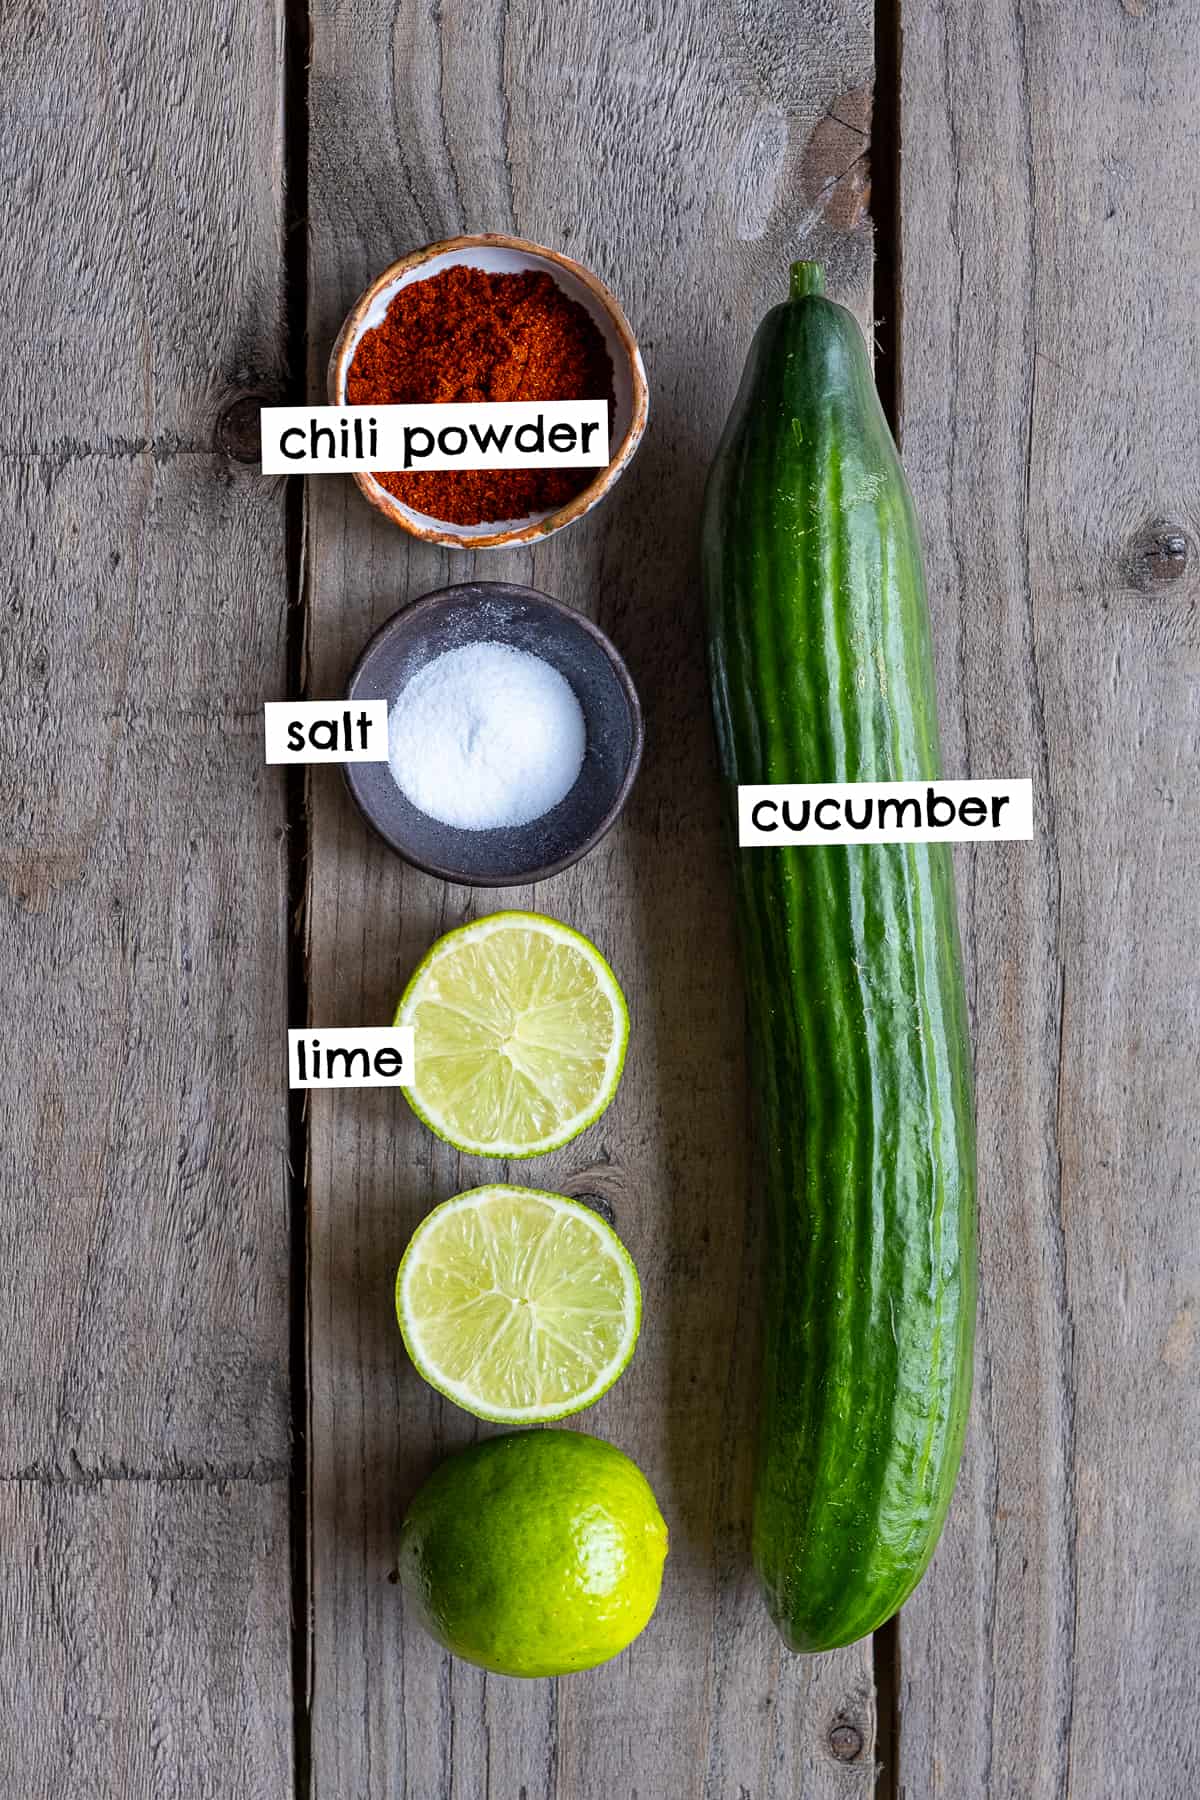 A large cucumber, chili powder, salt, limes on a wooden background.